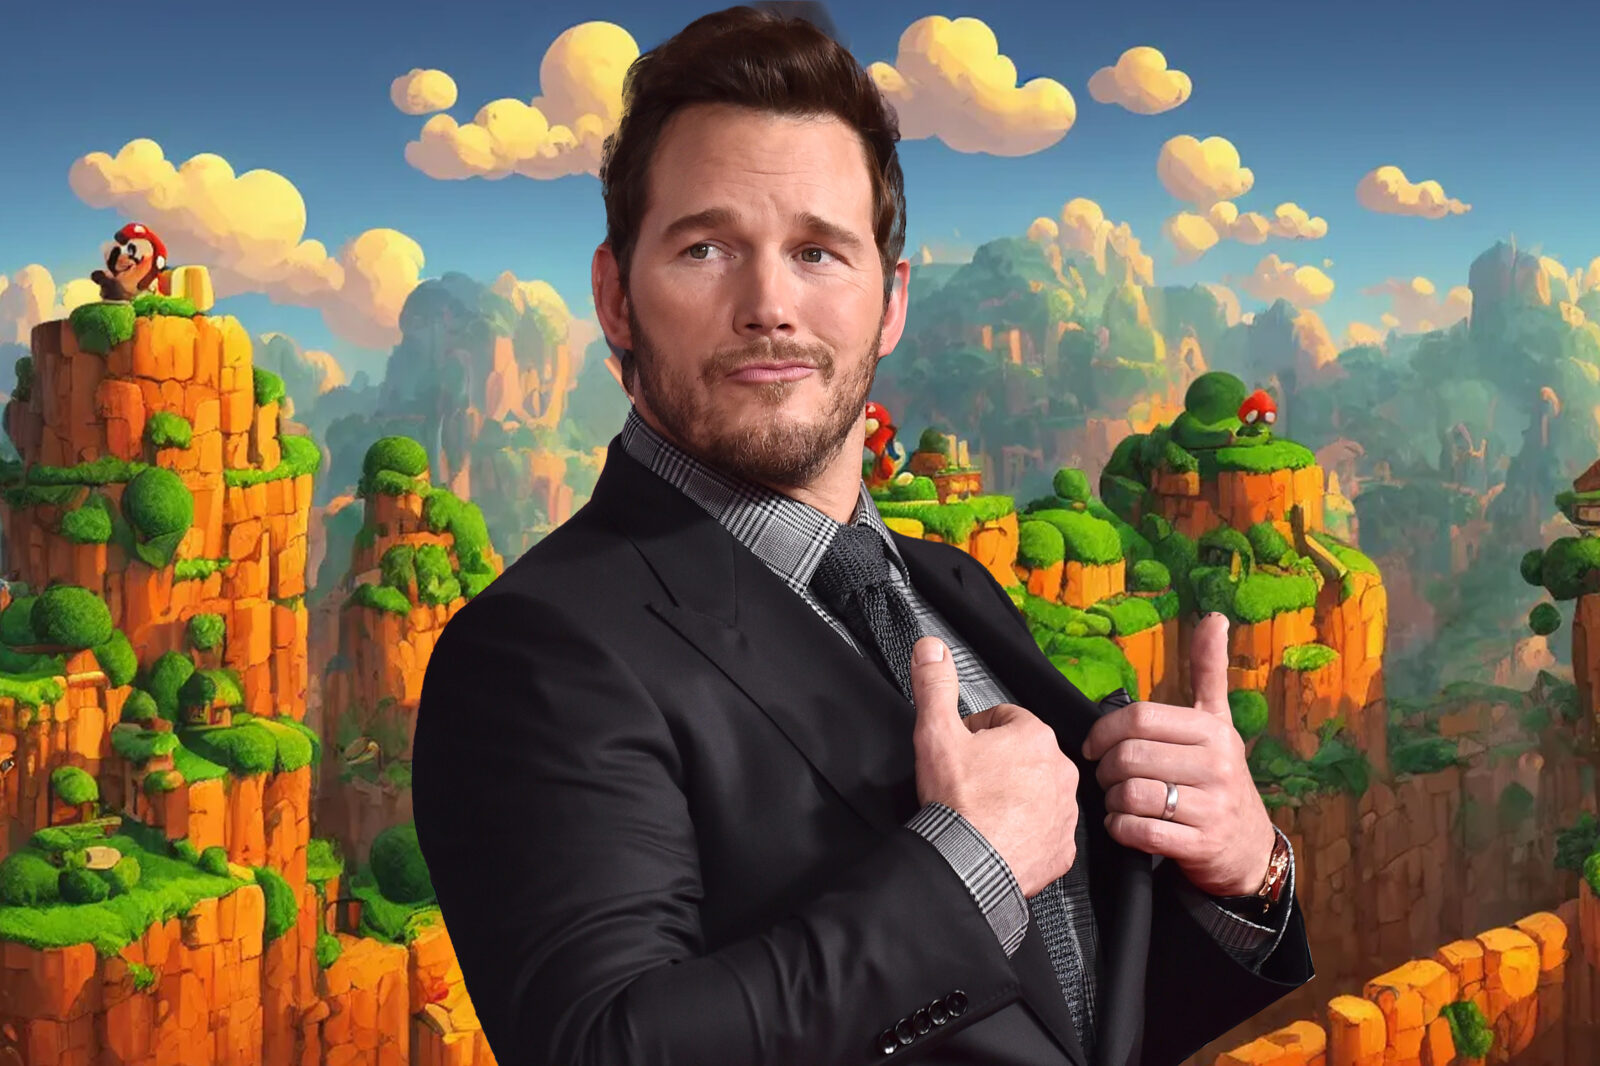 The Mario Movie Will Be Better Than the Original, Even with Chris Pratt